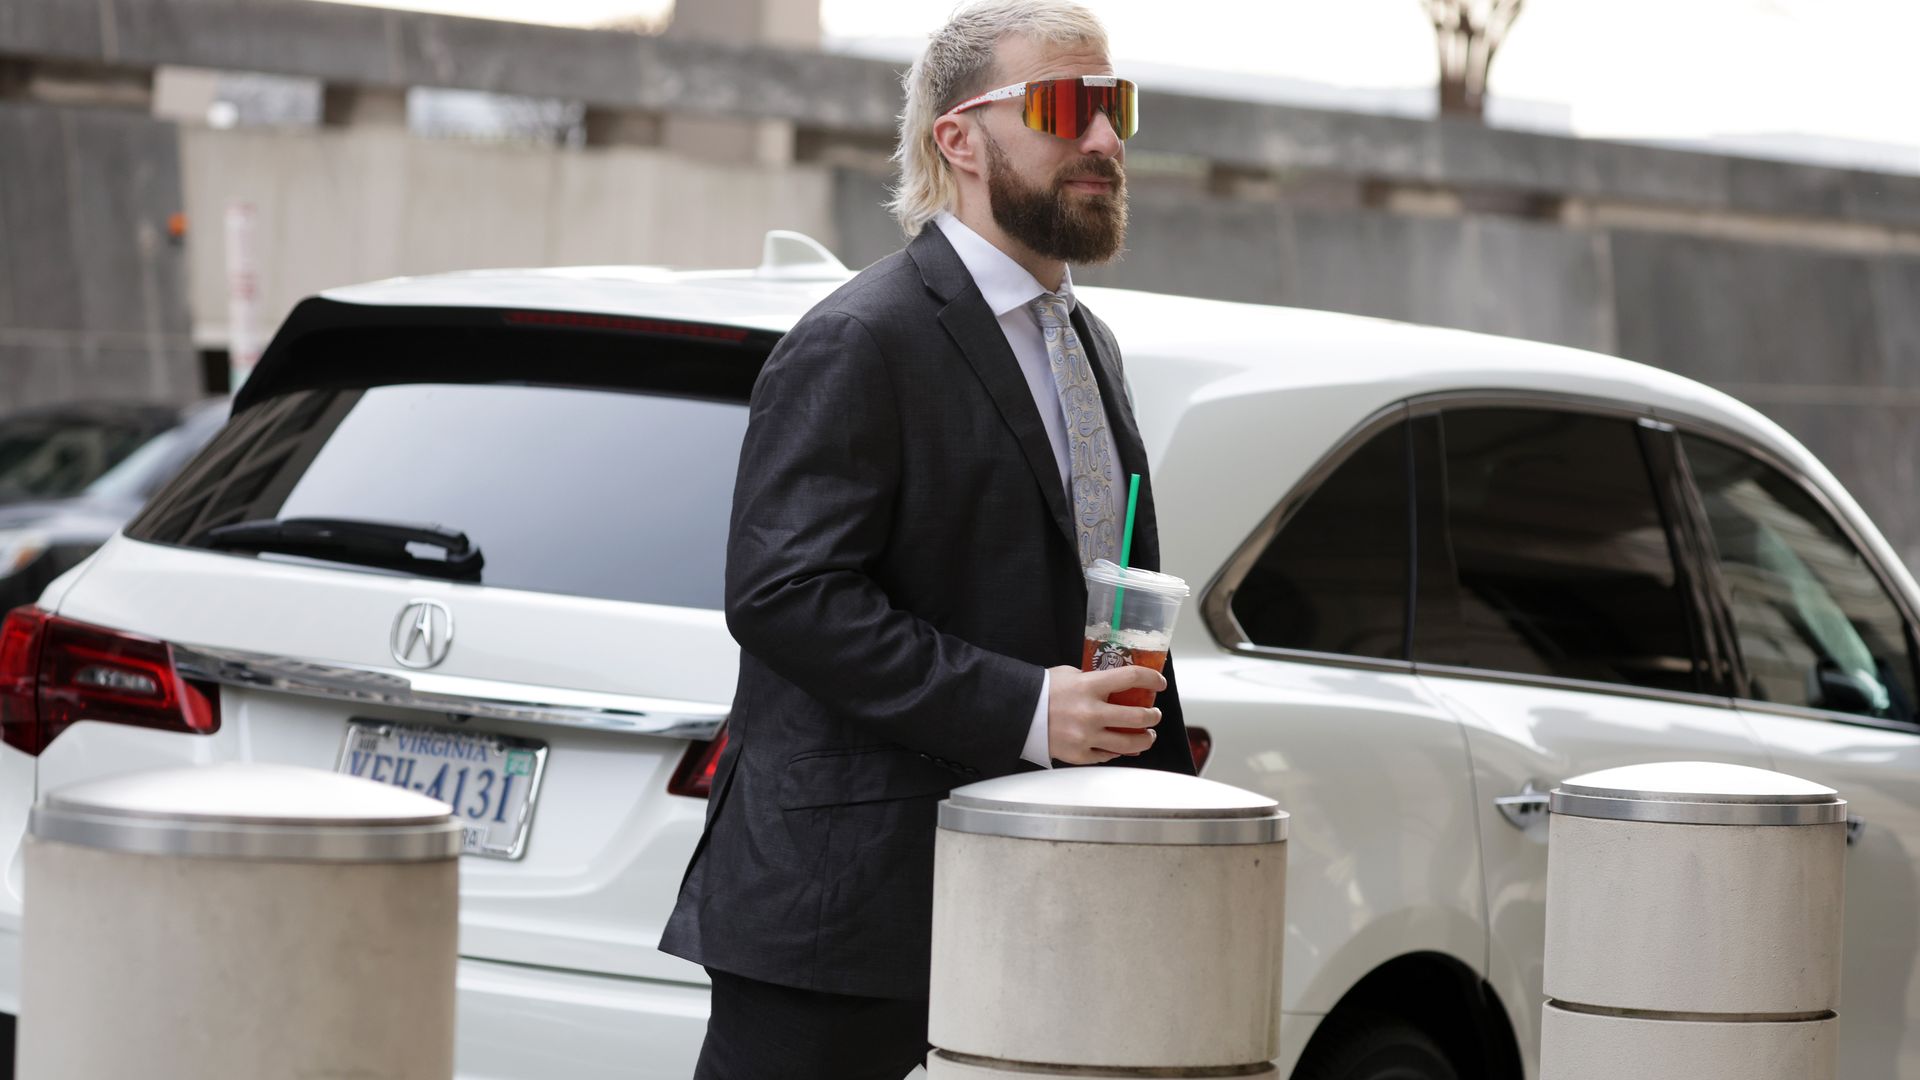 Far-right media personality Anthime Gionet, also known as "Baked Alaska," walking into a federal courthouse in Washington, D.C., on Jan. 10.